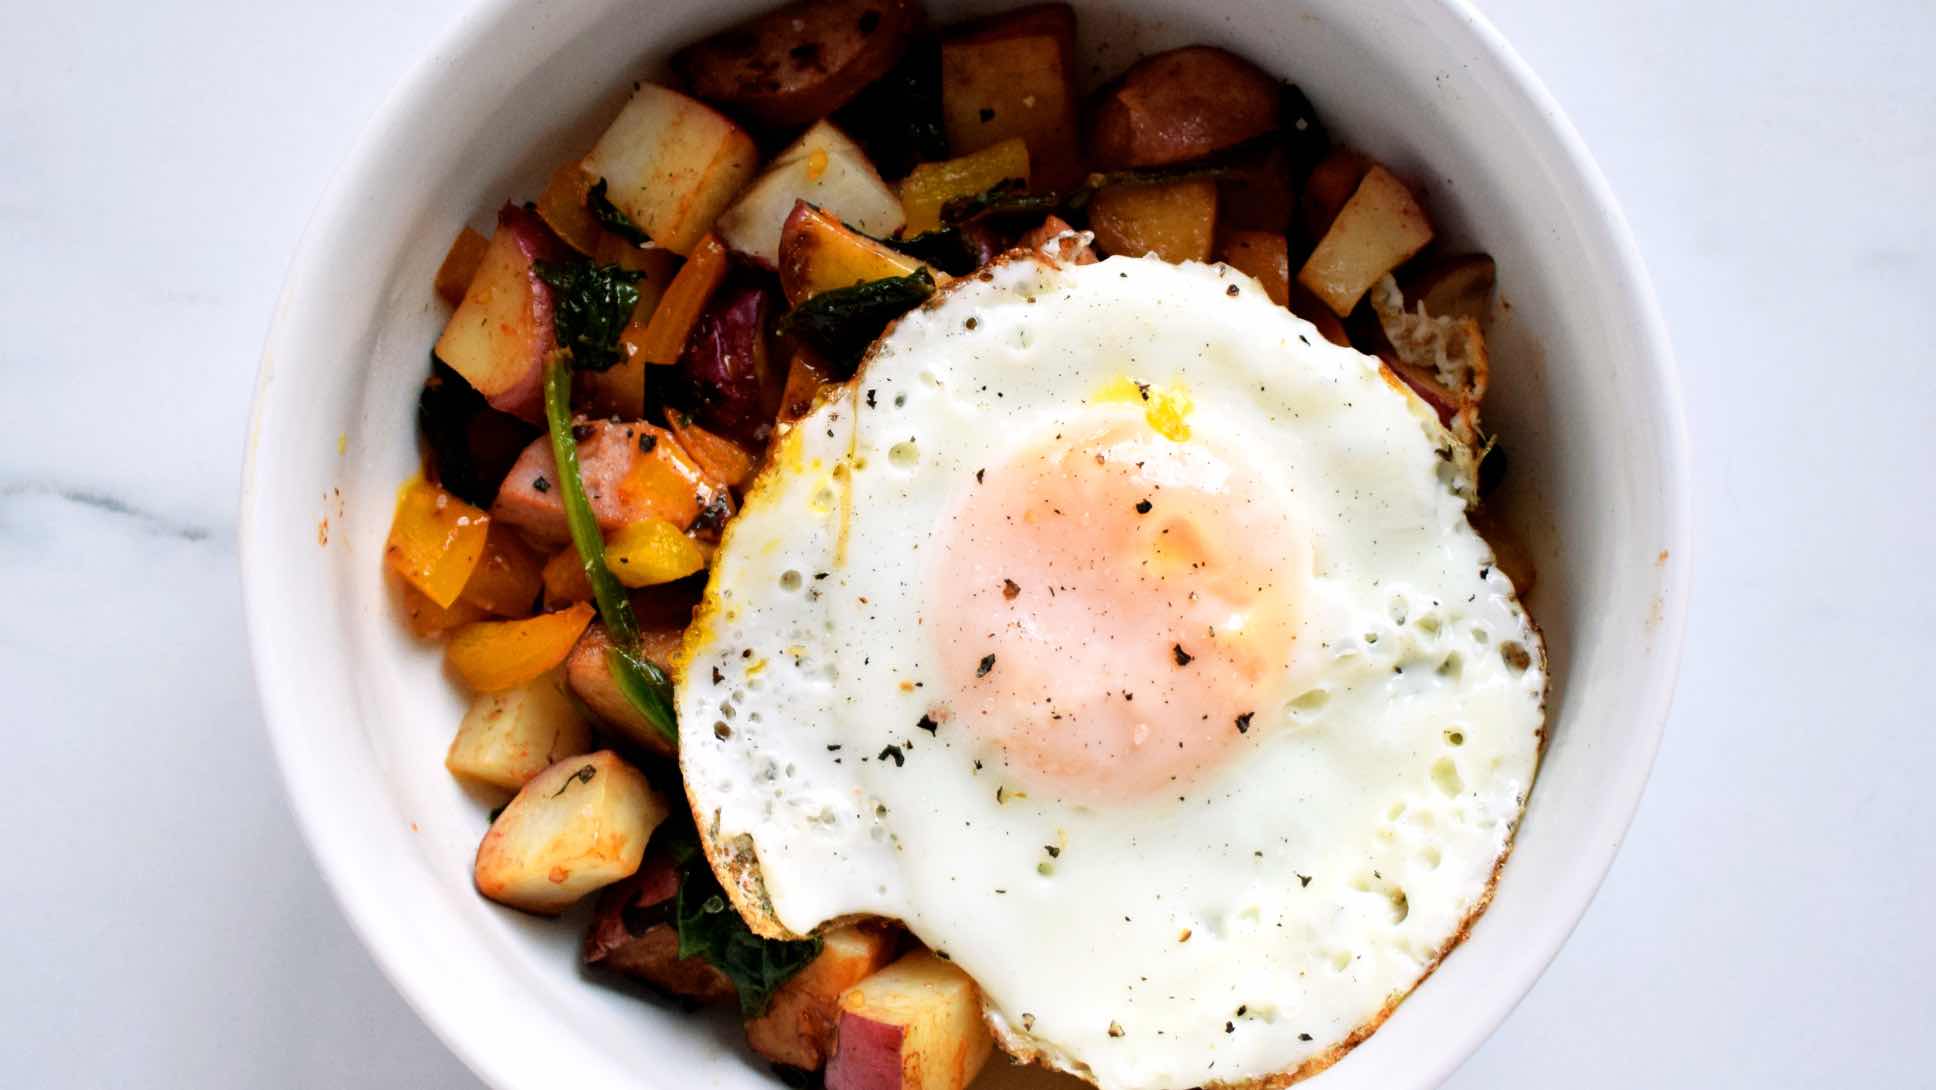 Brinner bowl, including potatoes and an egg.